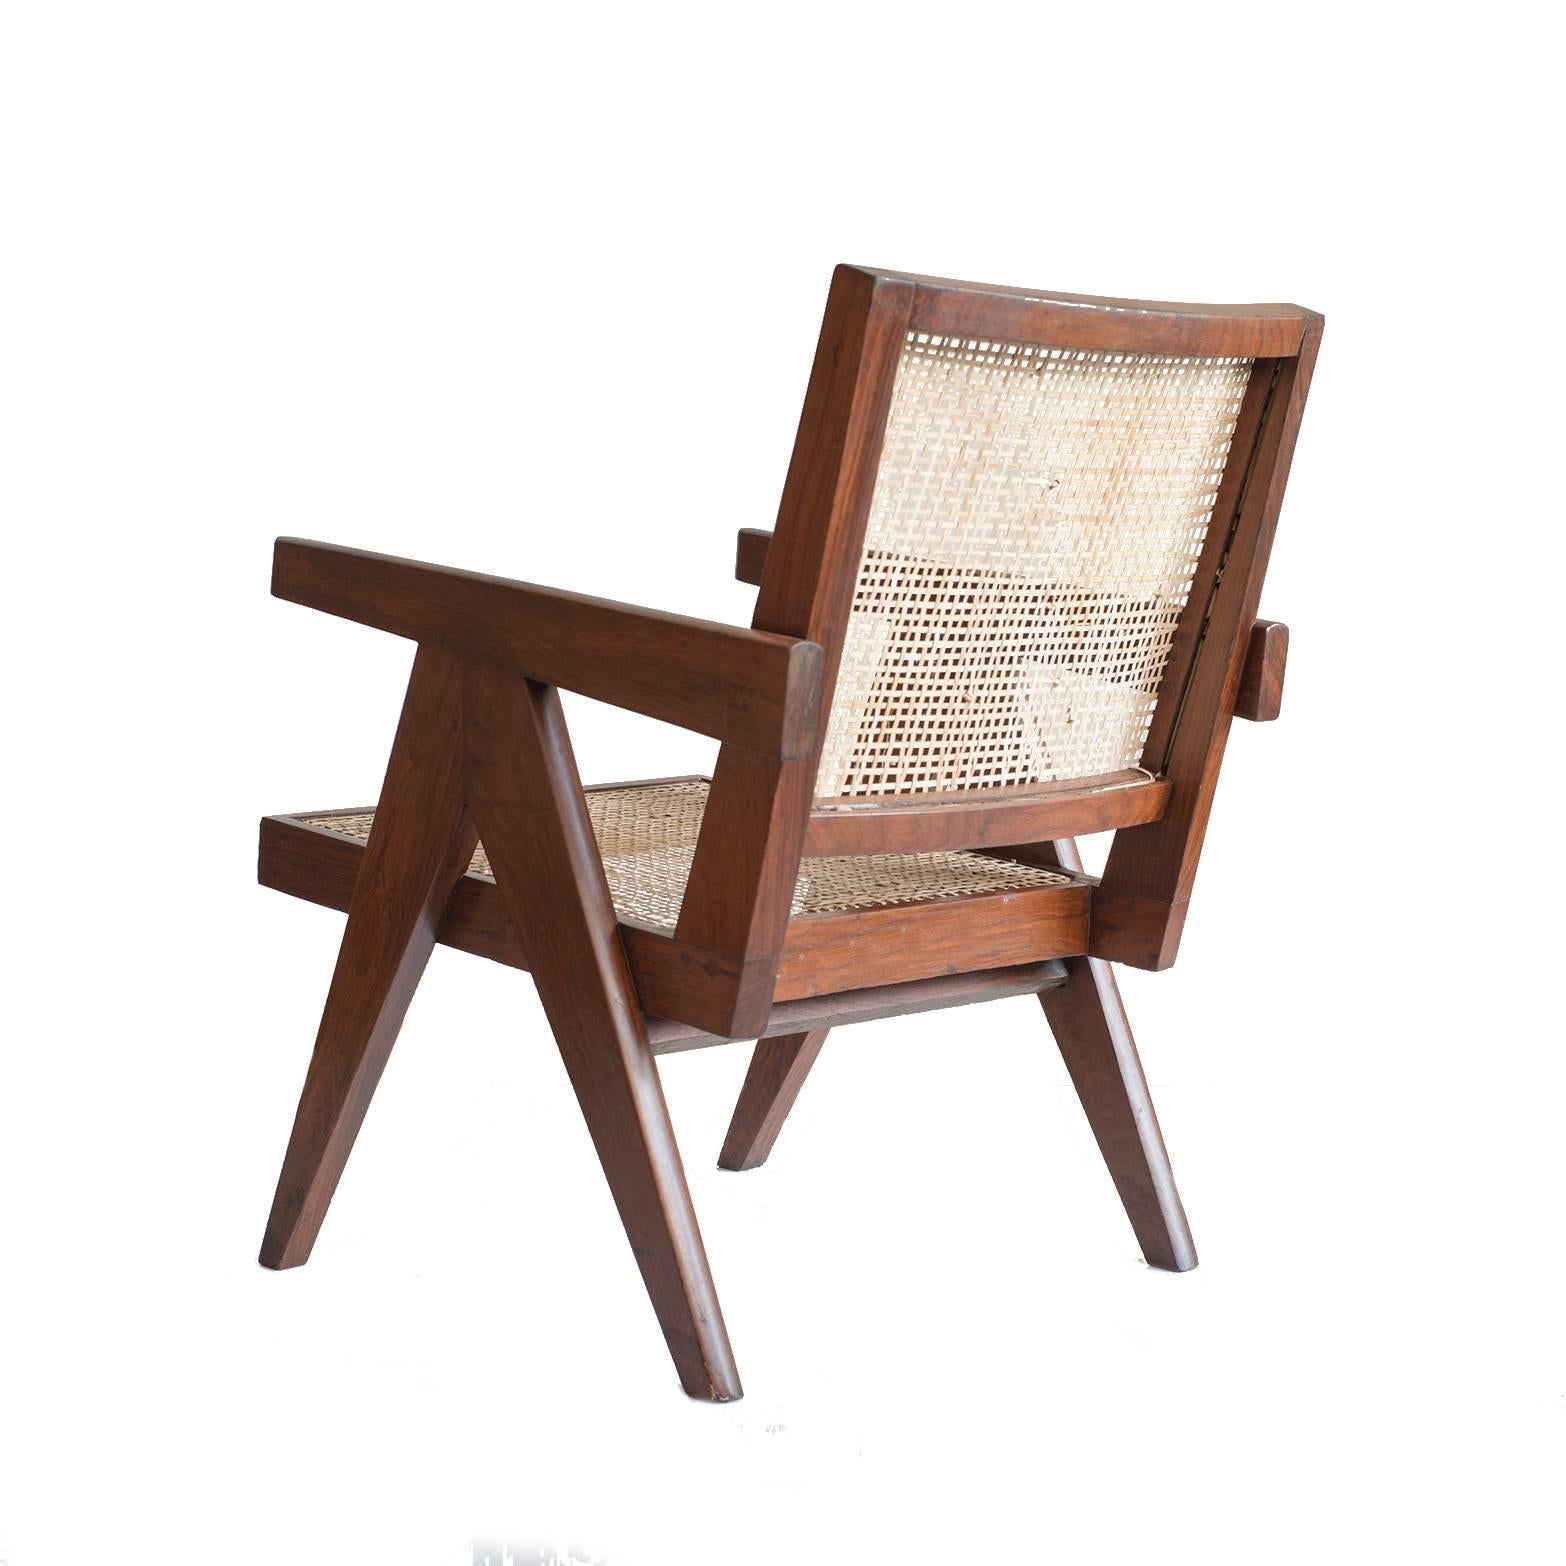 A pair of Pierre Jeanneret Easy Cane Chairs for Chandigarh PJ-SI-29-A